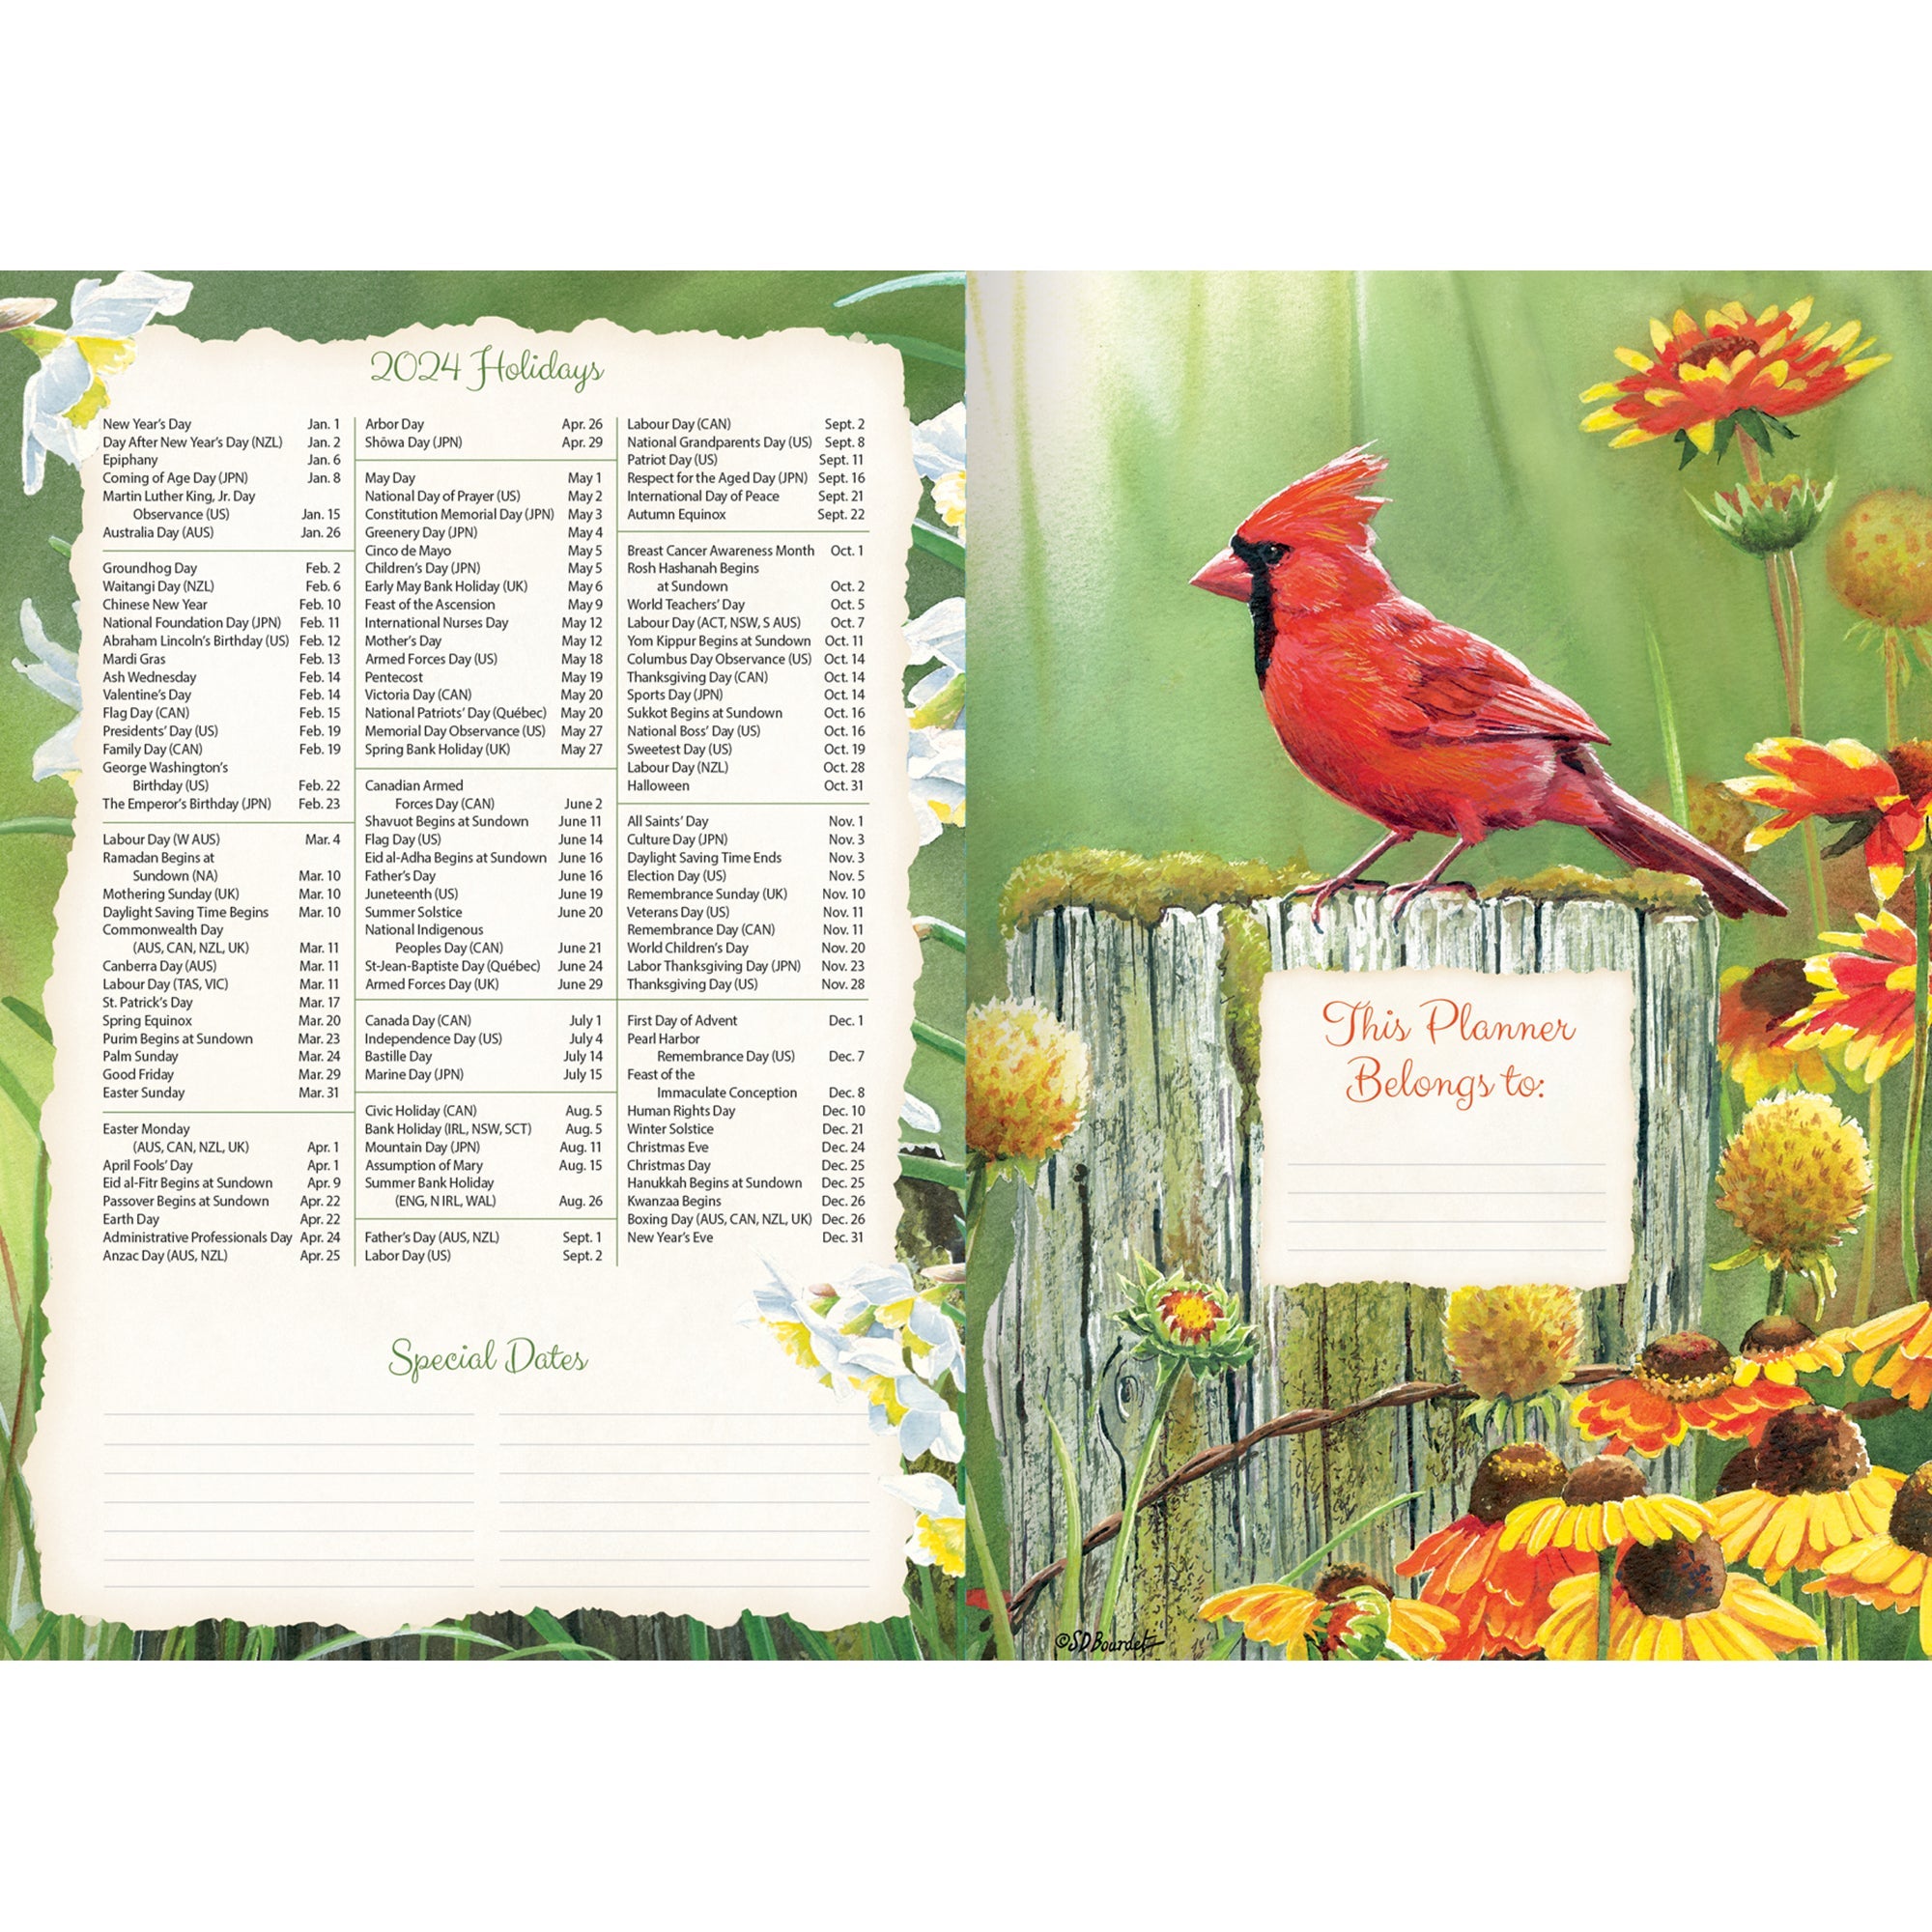 2024 LANG Songbirds - 13 Month Pocket Diary/Planner